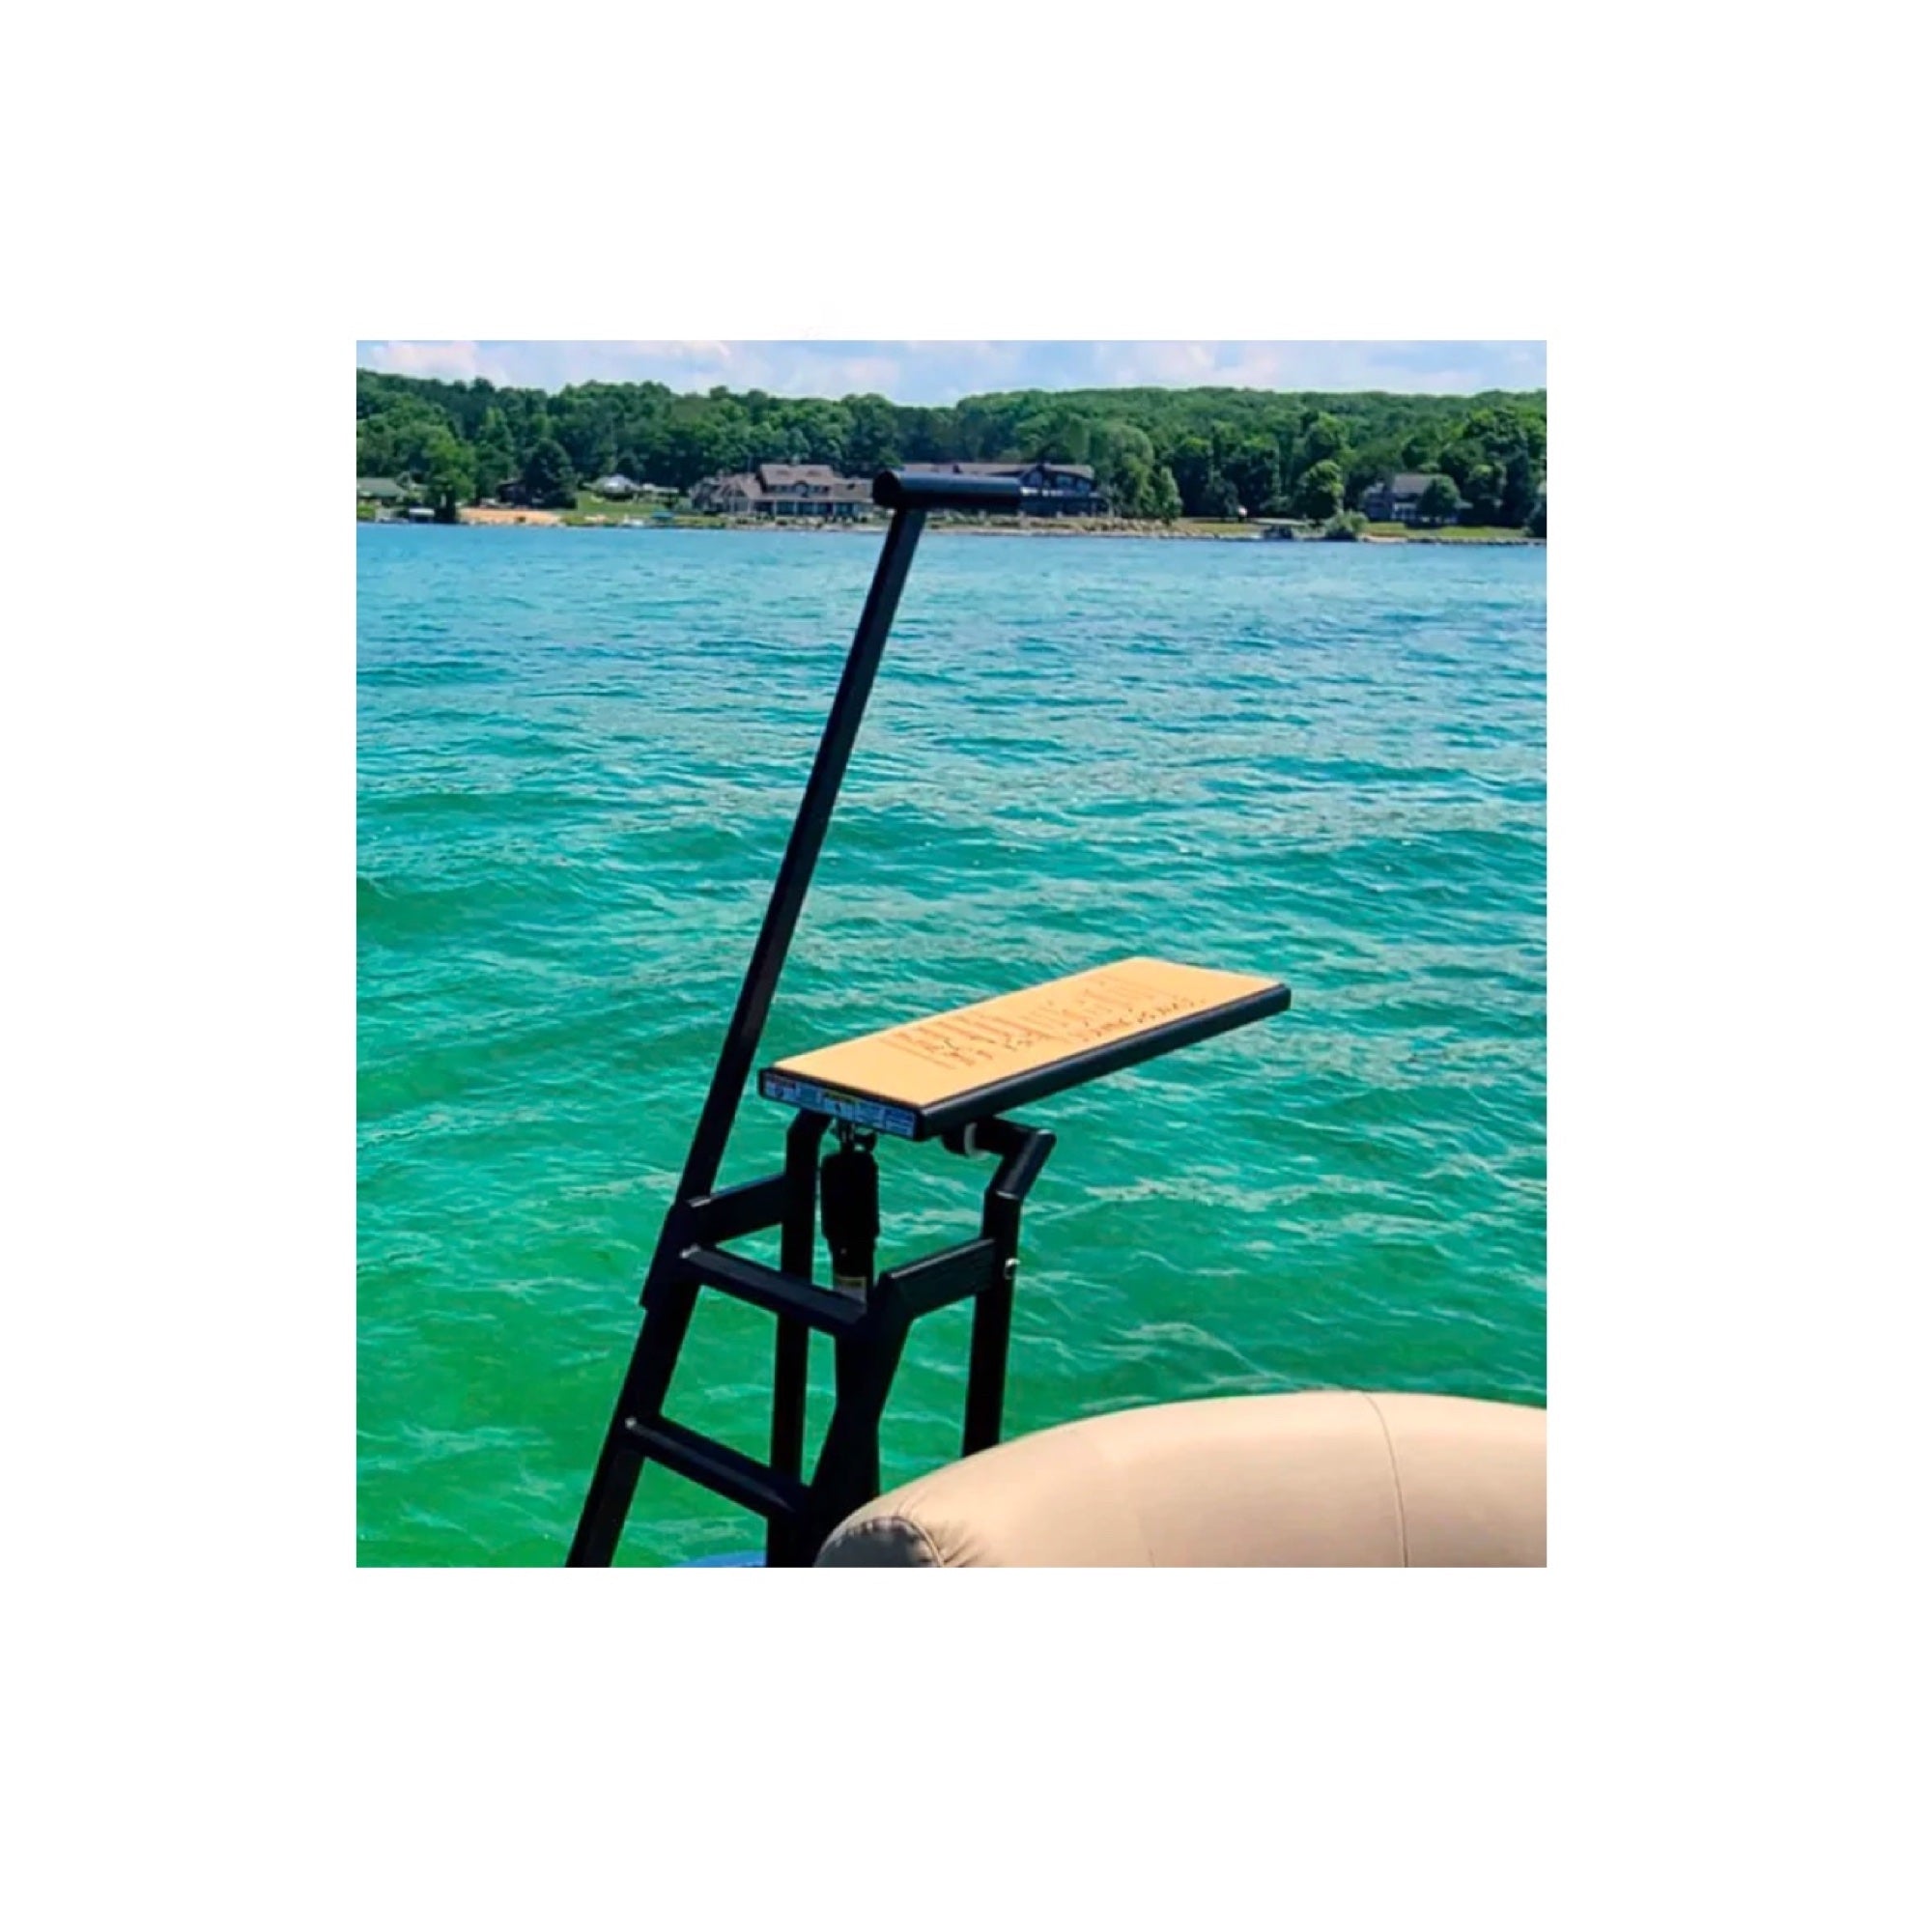 This is the Lillipad Diving Board with the Black Powder-Coated Finish of the Mocha/Black Variation rested on the edge of the boat in the middle of the sea.